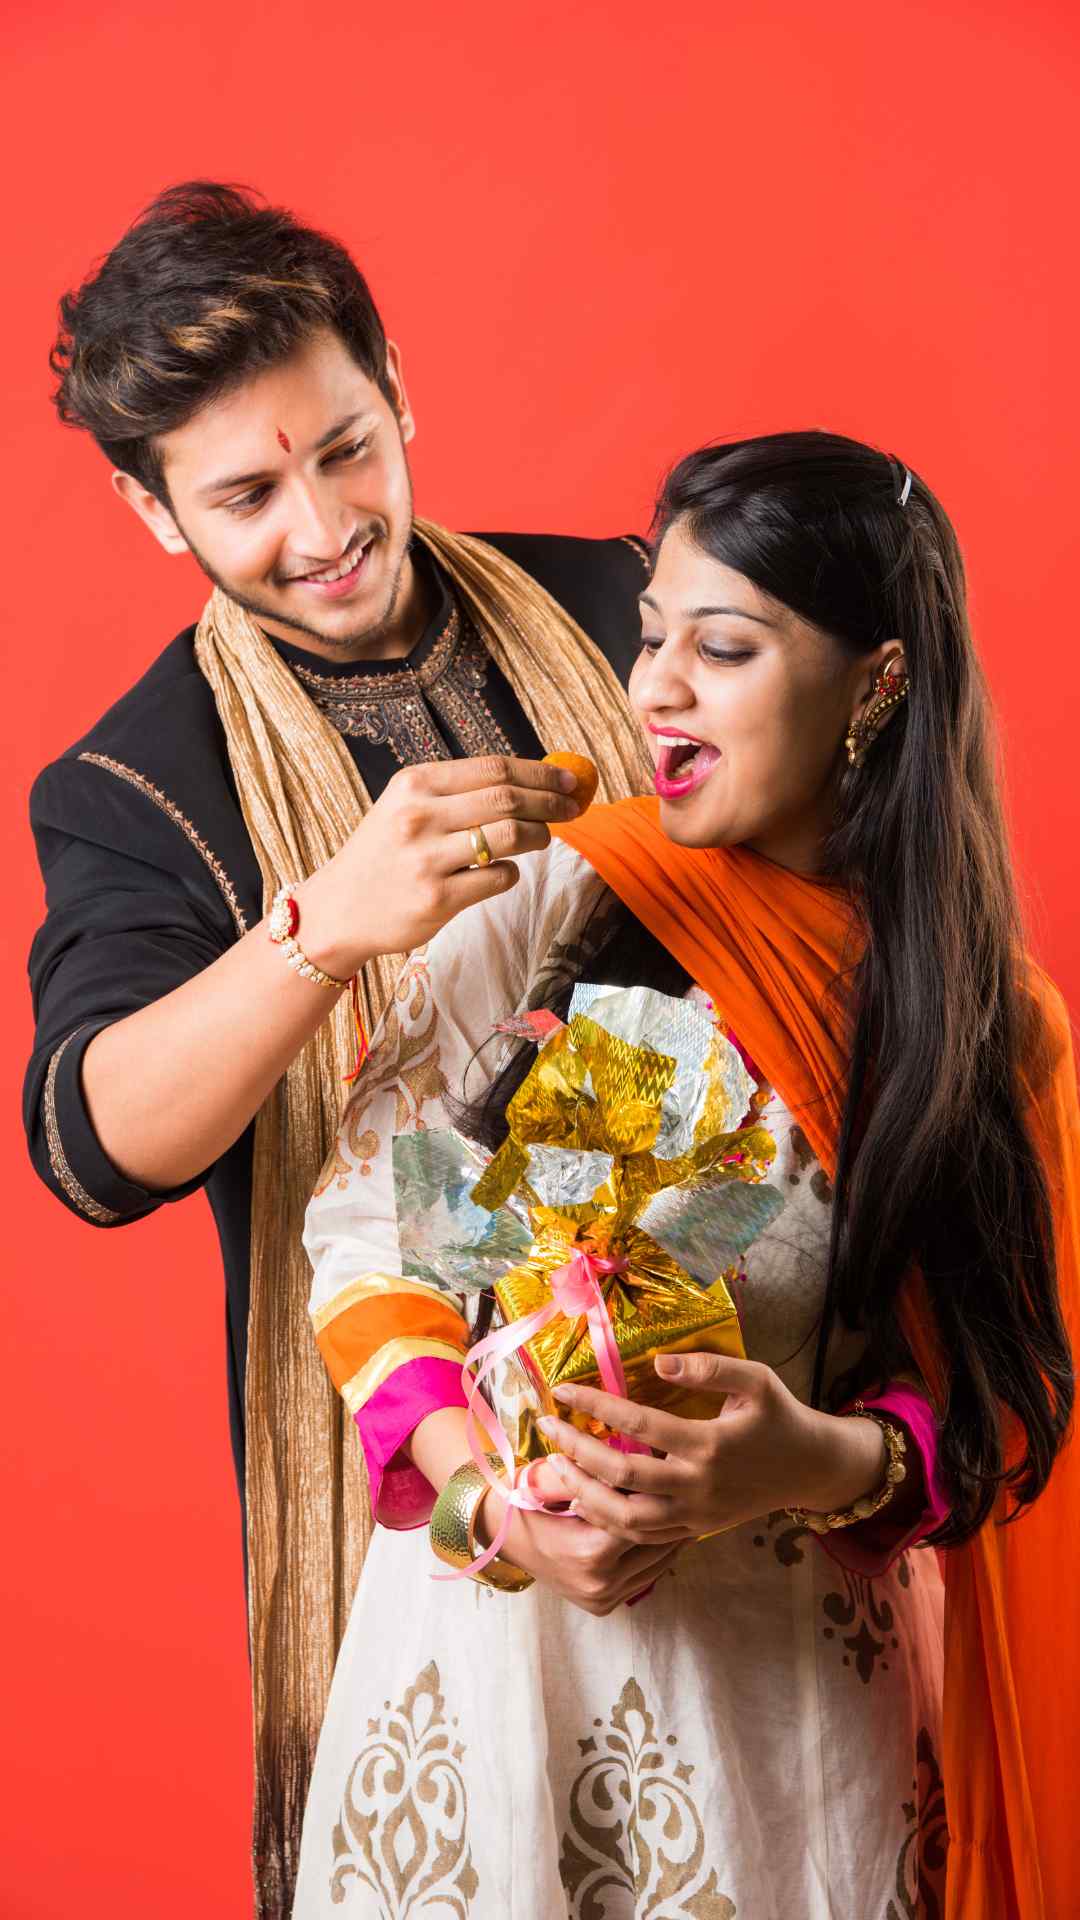 Oberoi Mall - Are you ready for the 'Raksha Bandhan photo contest'? Pose  together at our special photo corner with your brother/sister and get your  picture clicked. Upload the photo on our